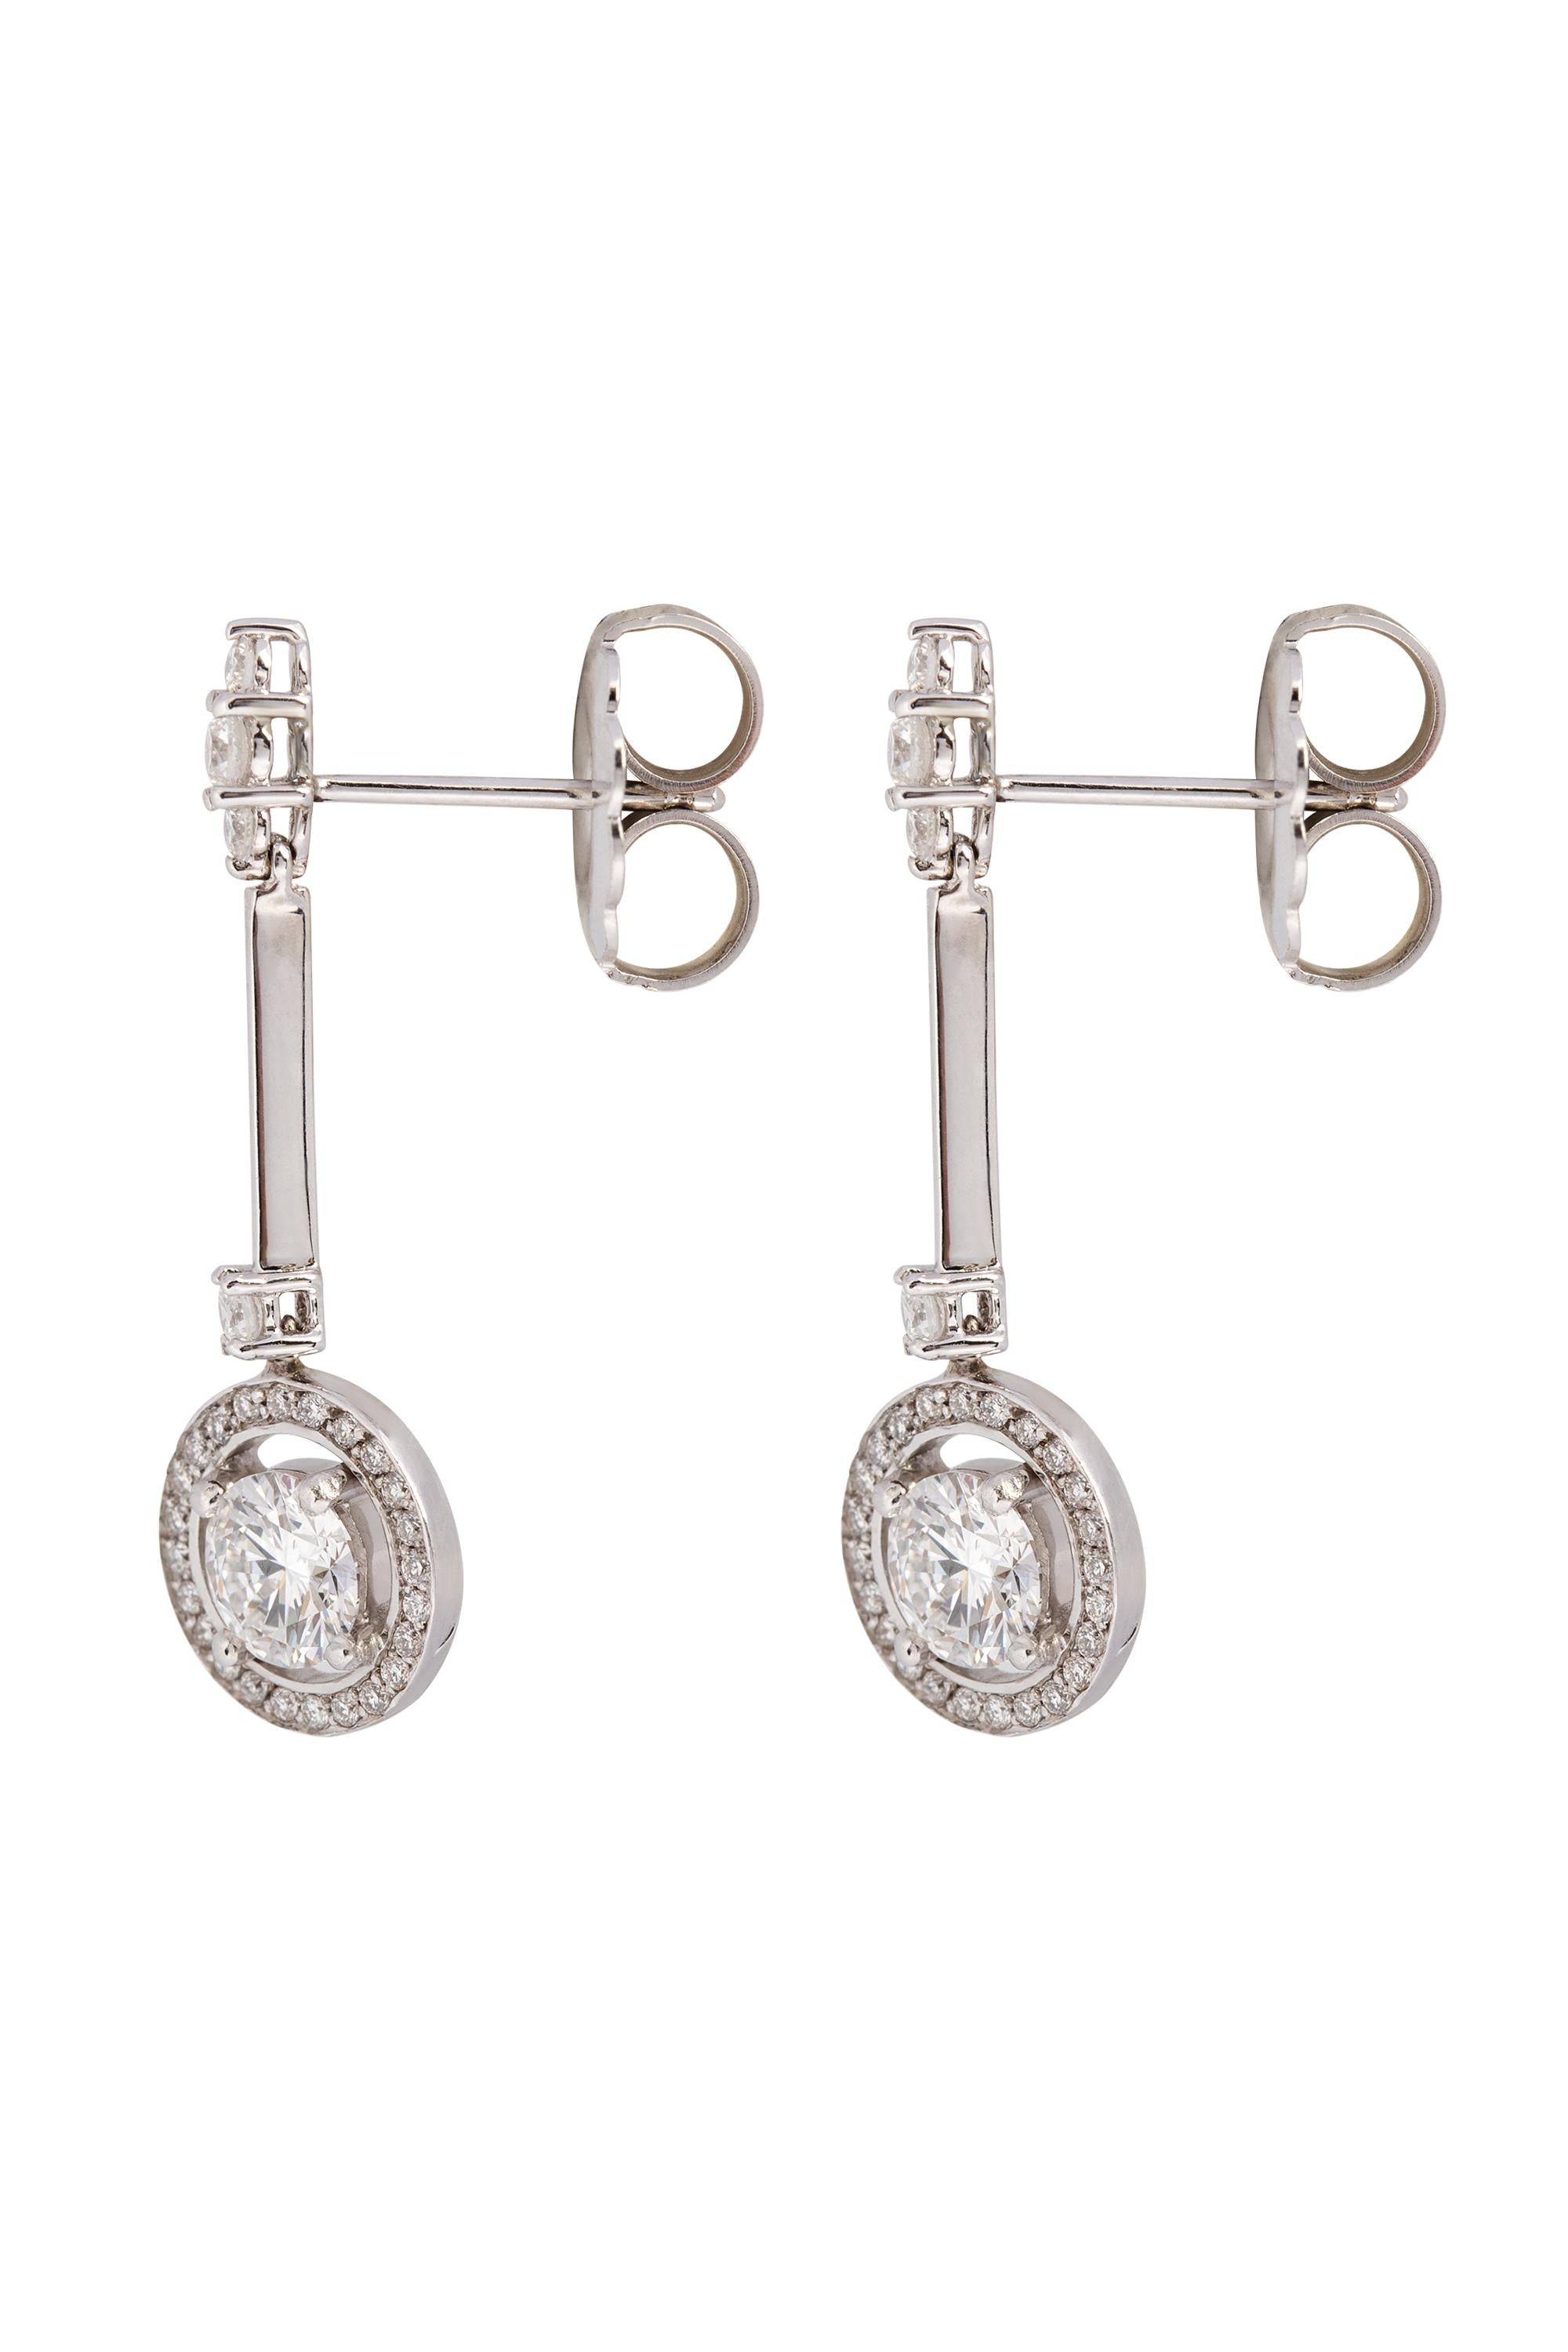 A beautiful pair of Art Deco inspired diamond drop earrings mounted in 18-karat white gold. These chic dangles feature two bright white round brilliant diamonds, E-F in color, VS in clarity with an approximate total weight of 1 carat, centered